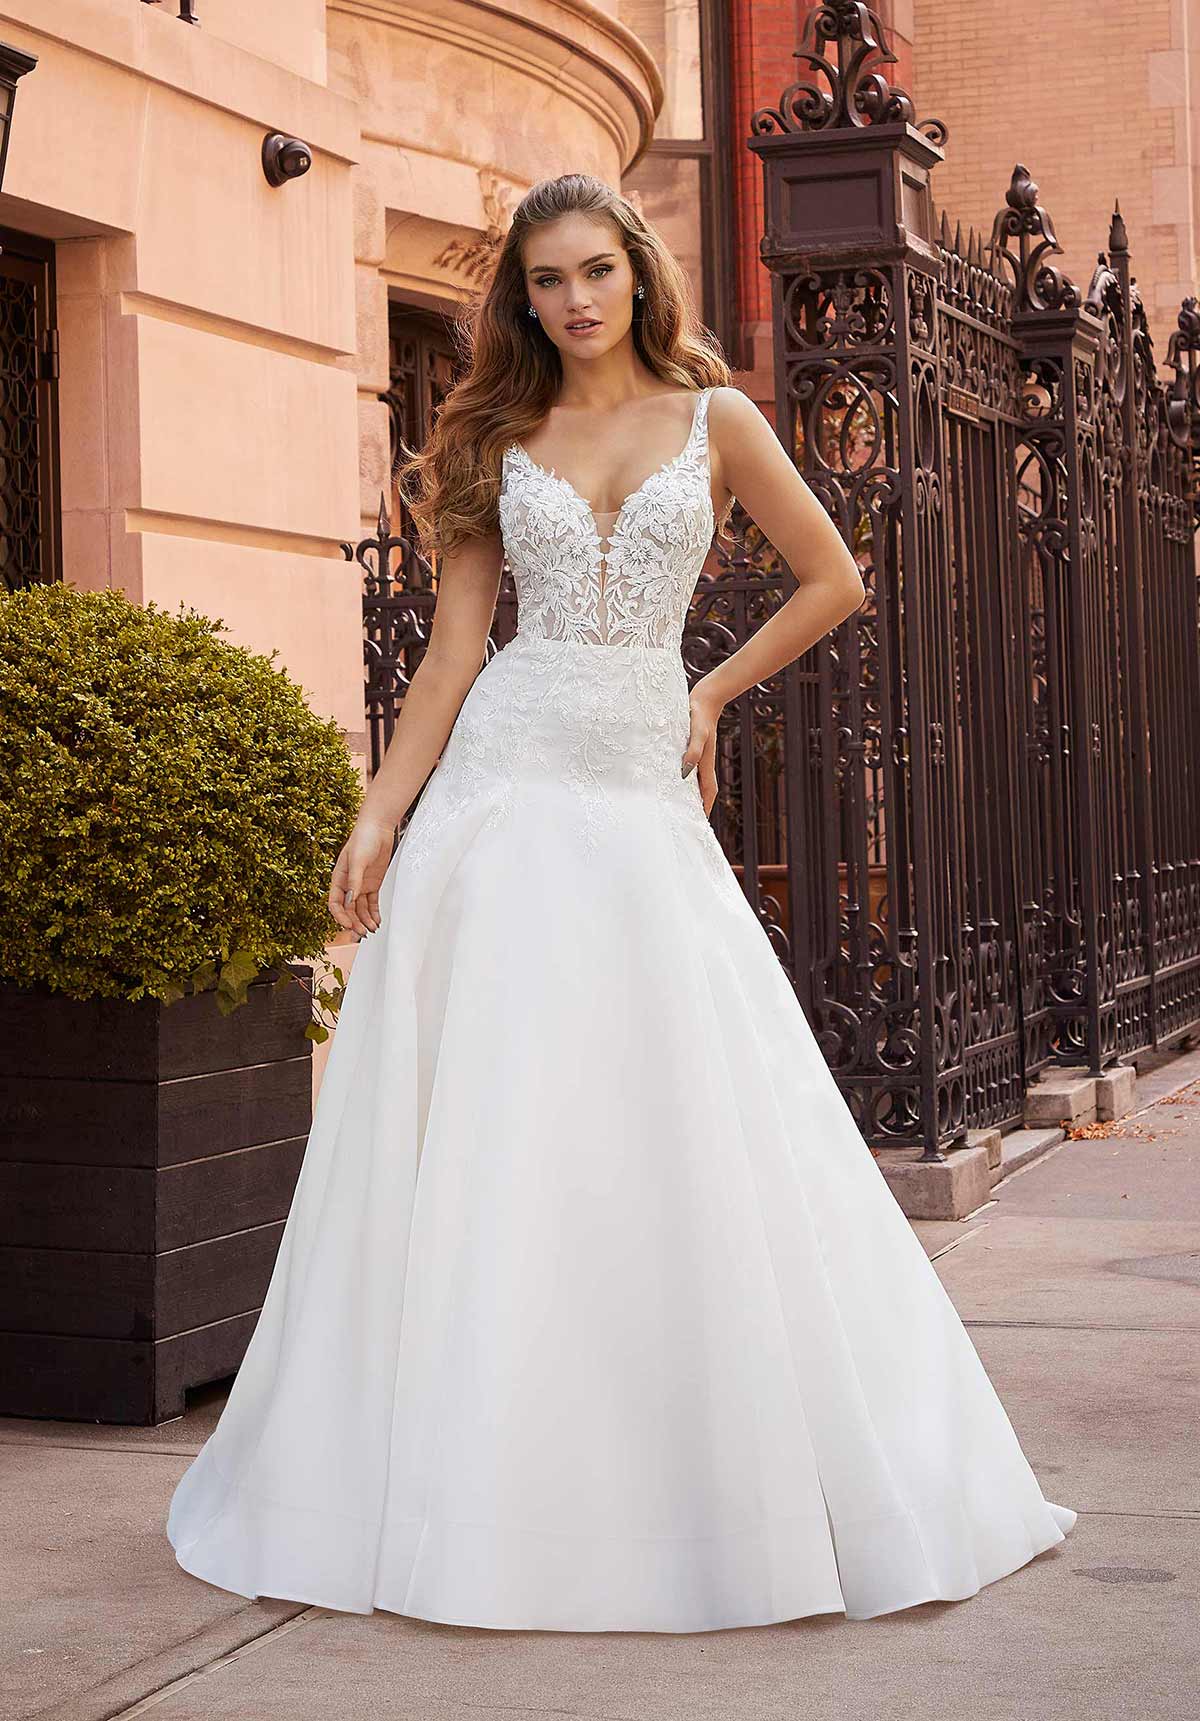 Morilee - 2522 - Julia - Cheron's Bridal, Wedding Gown - Morilee Line - - Wedding Gowns Dresses Chattanooga Hixson Shops Boutiques Tennessee TN Georgia GA MSRP Lowest Prices Sale Discount